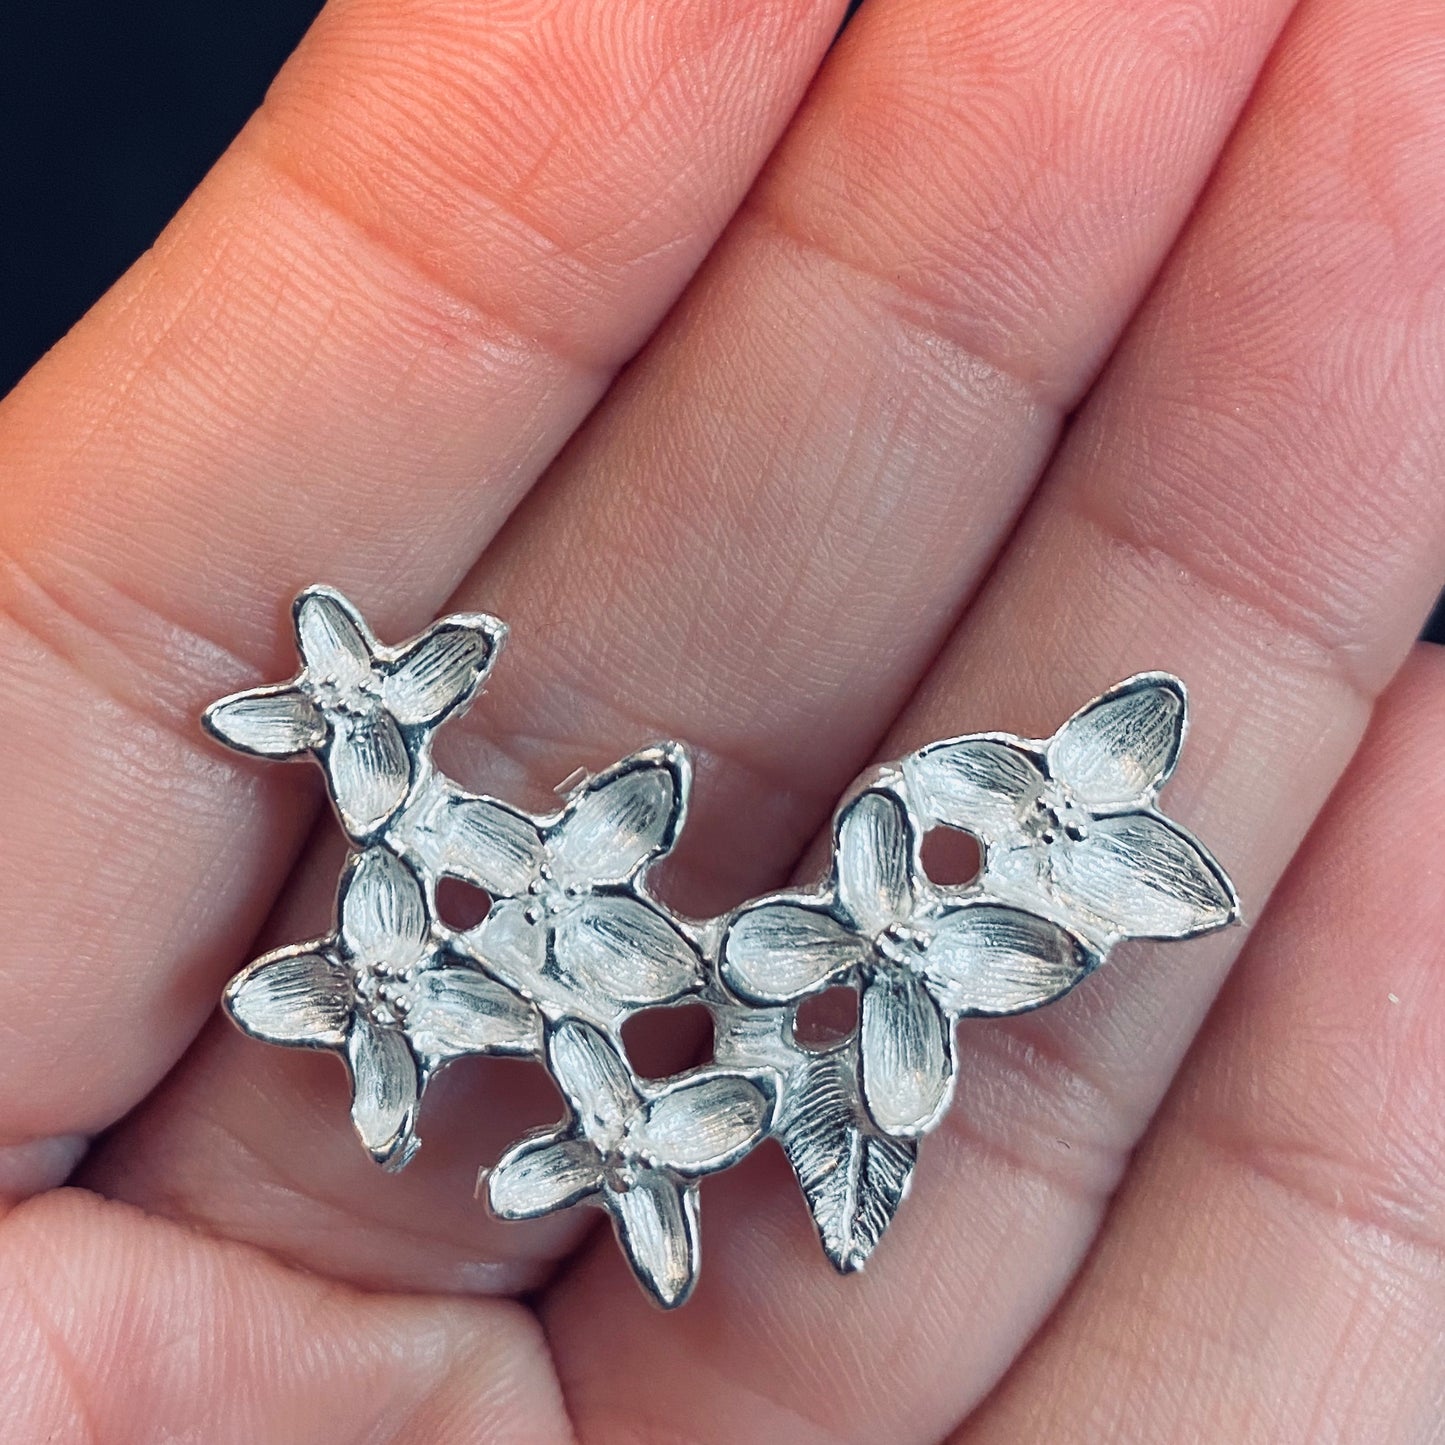 Cast Hand Carved Dogwood Flowers for Jewelry Design